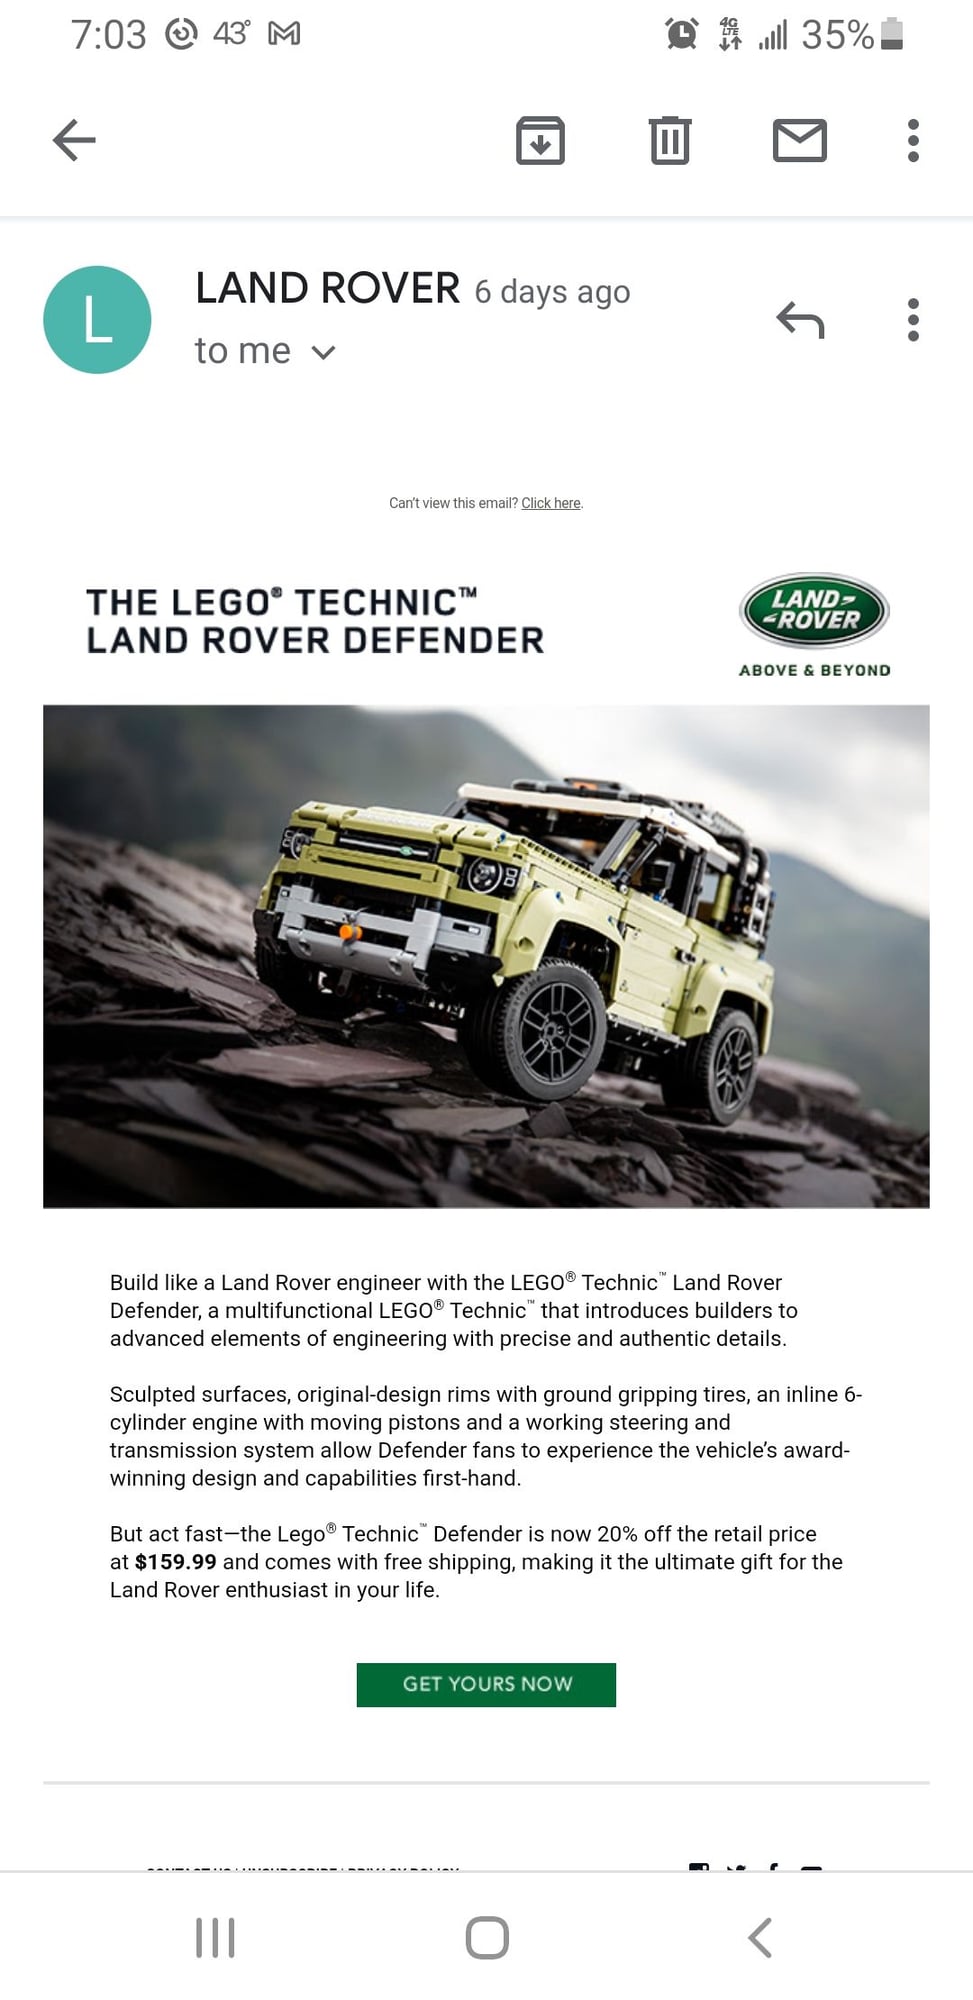 LEGO unveils 2020 land rover defender with 'most sophisticated gearbox yet